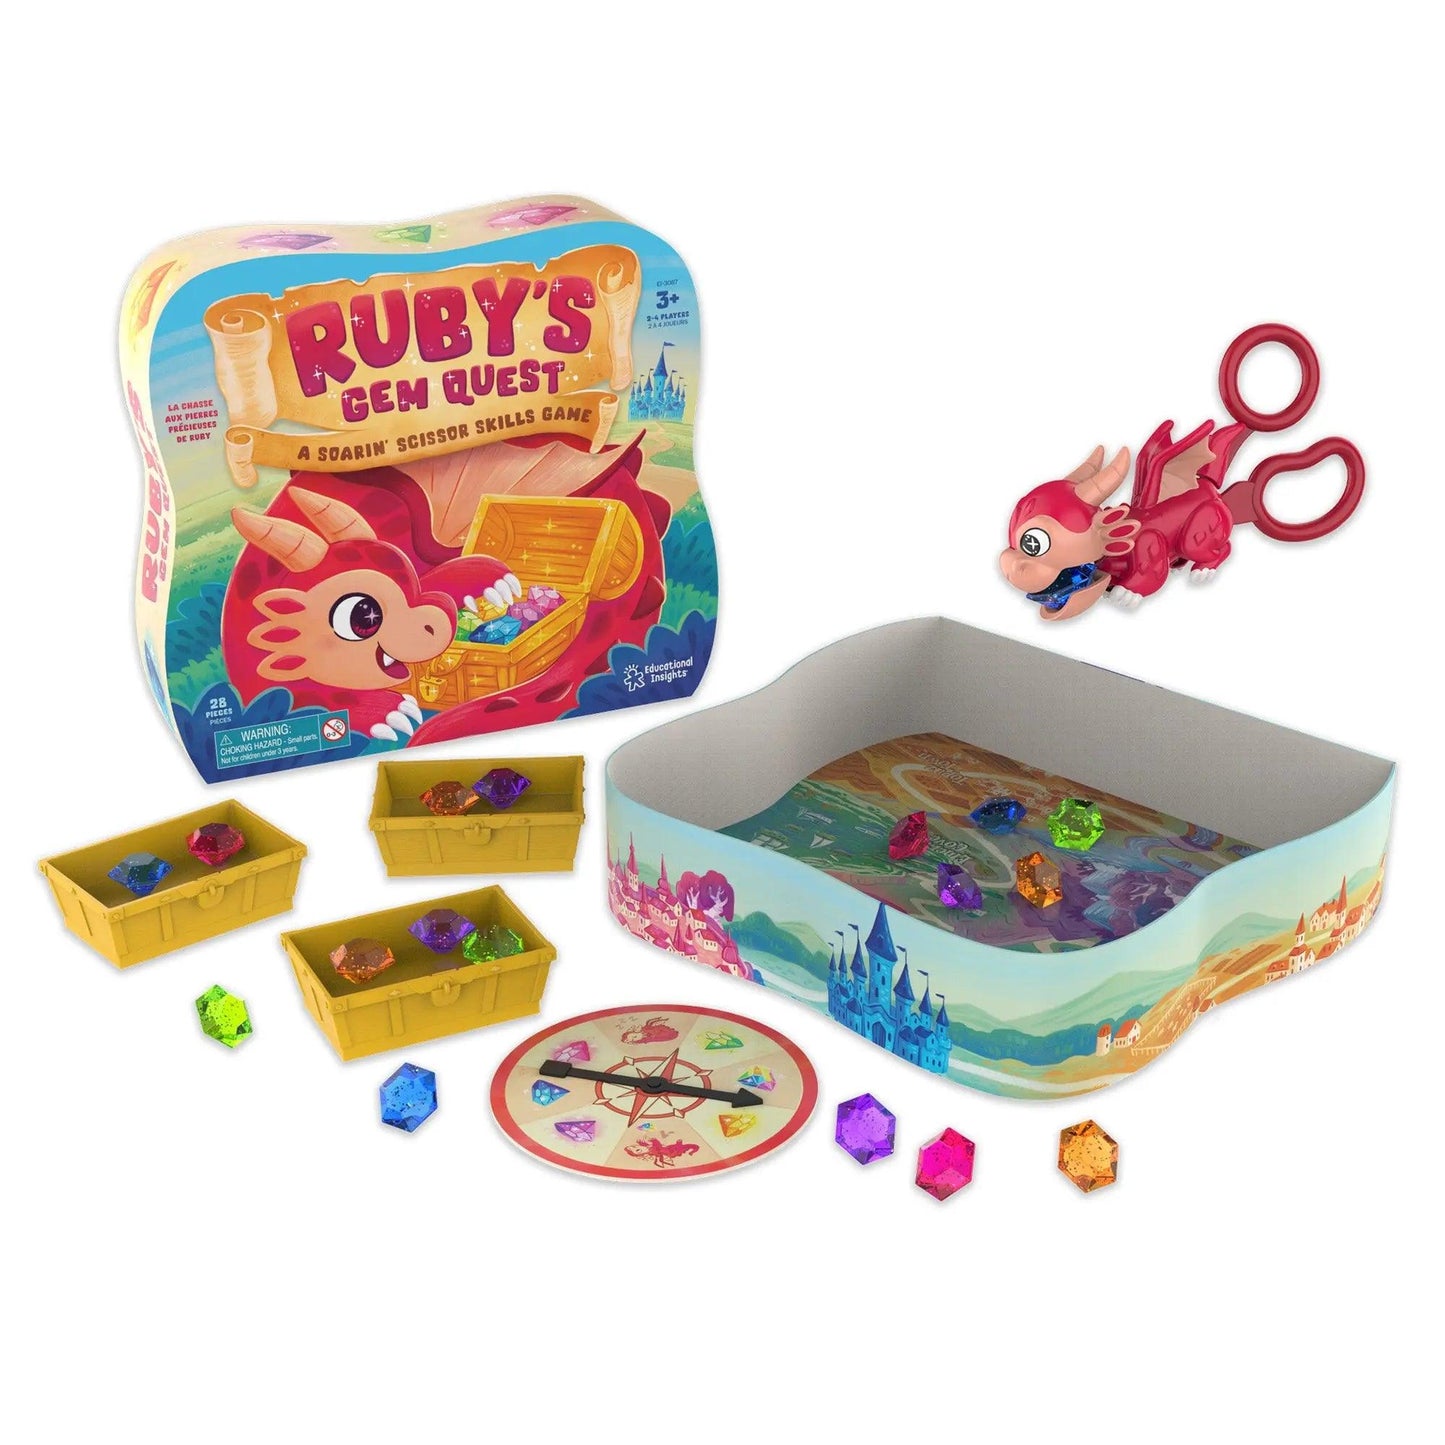 Ruby's Gem Quest Skills Game Educational Insights